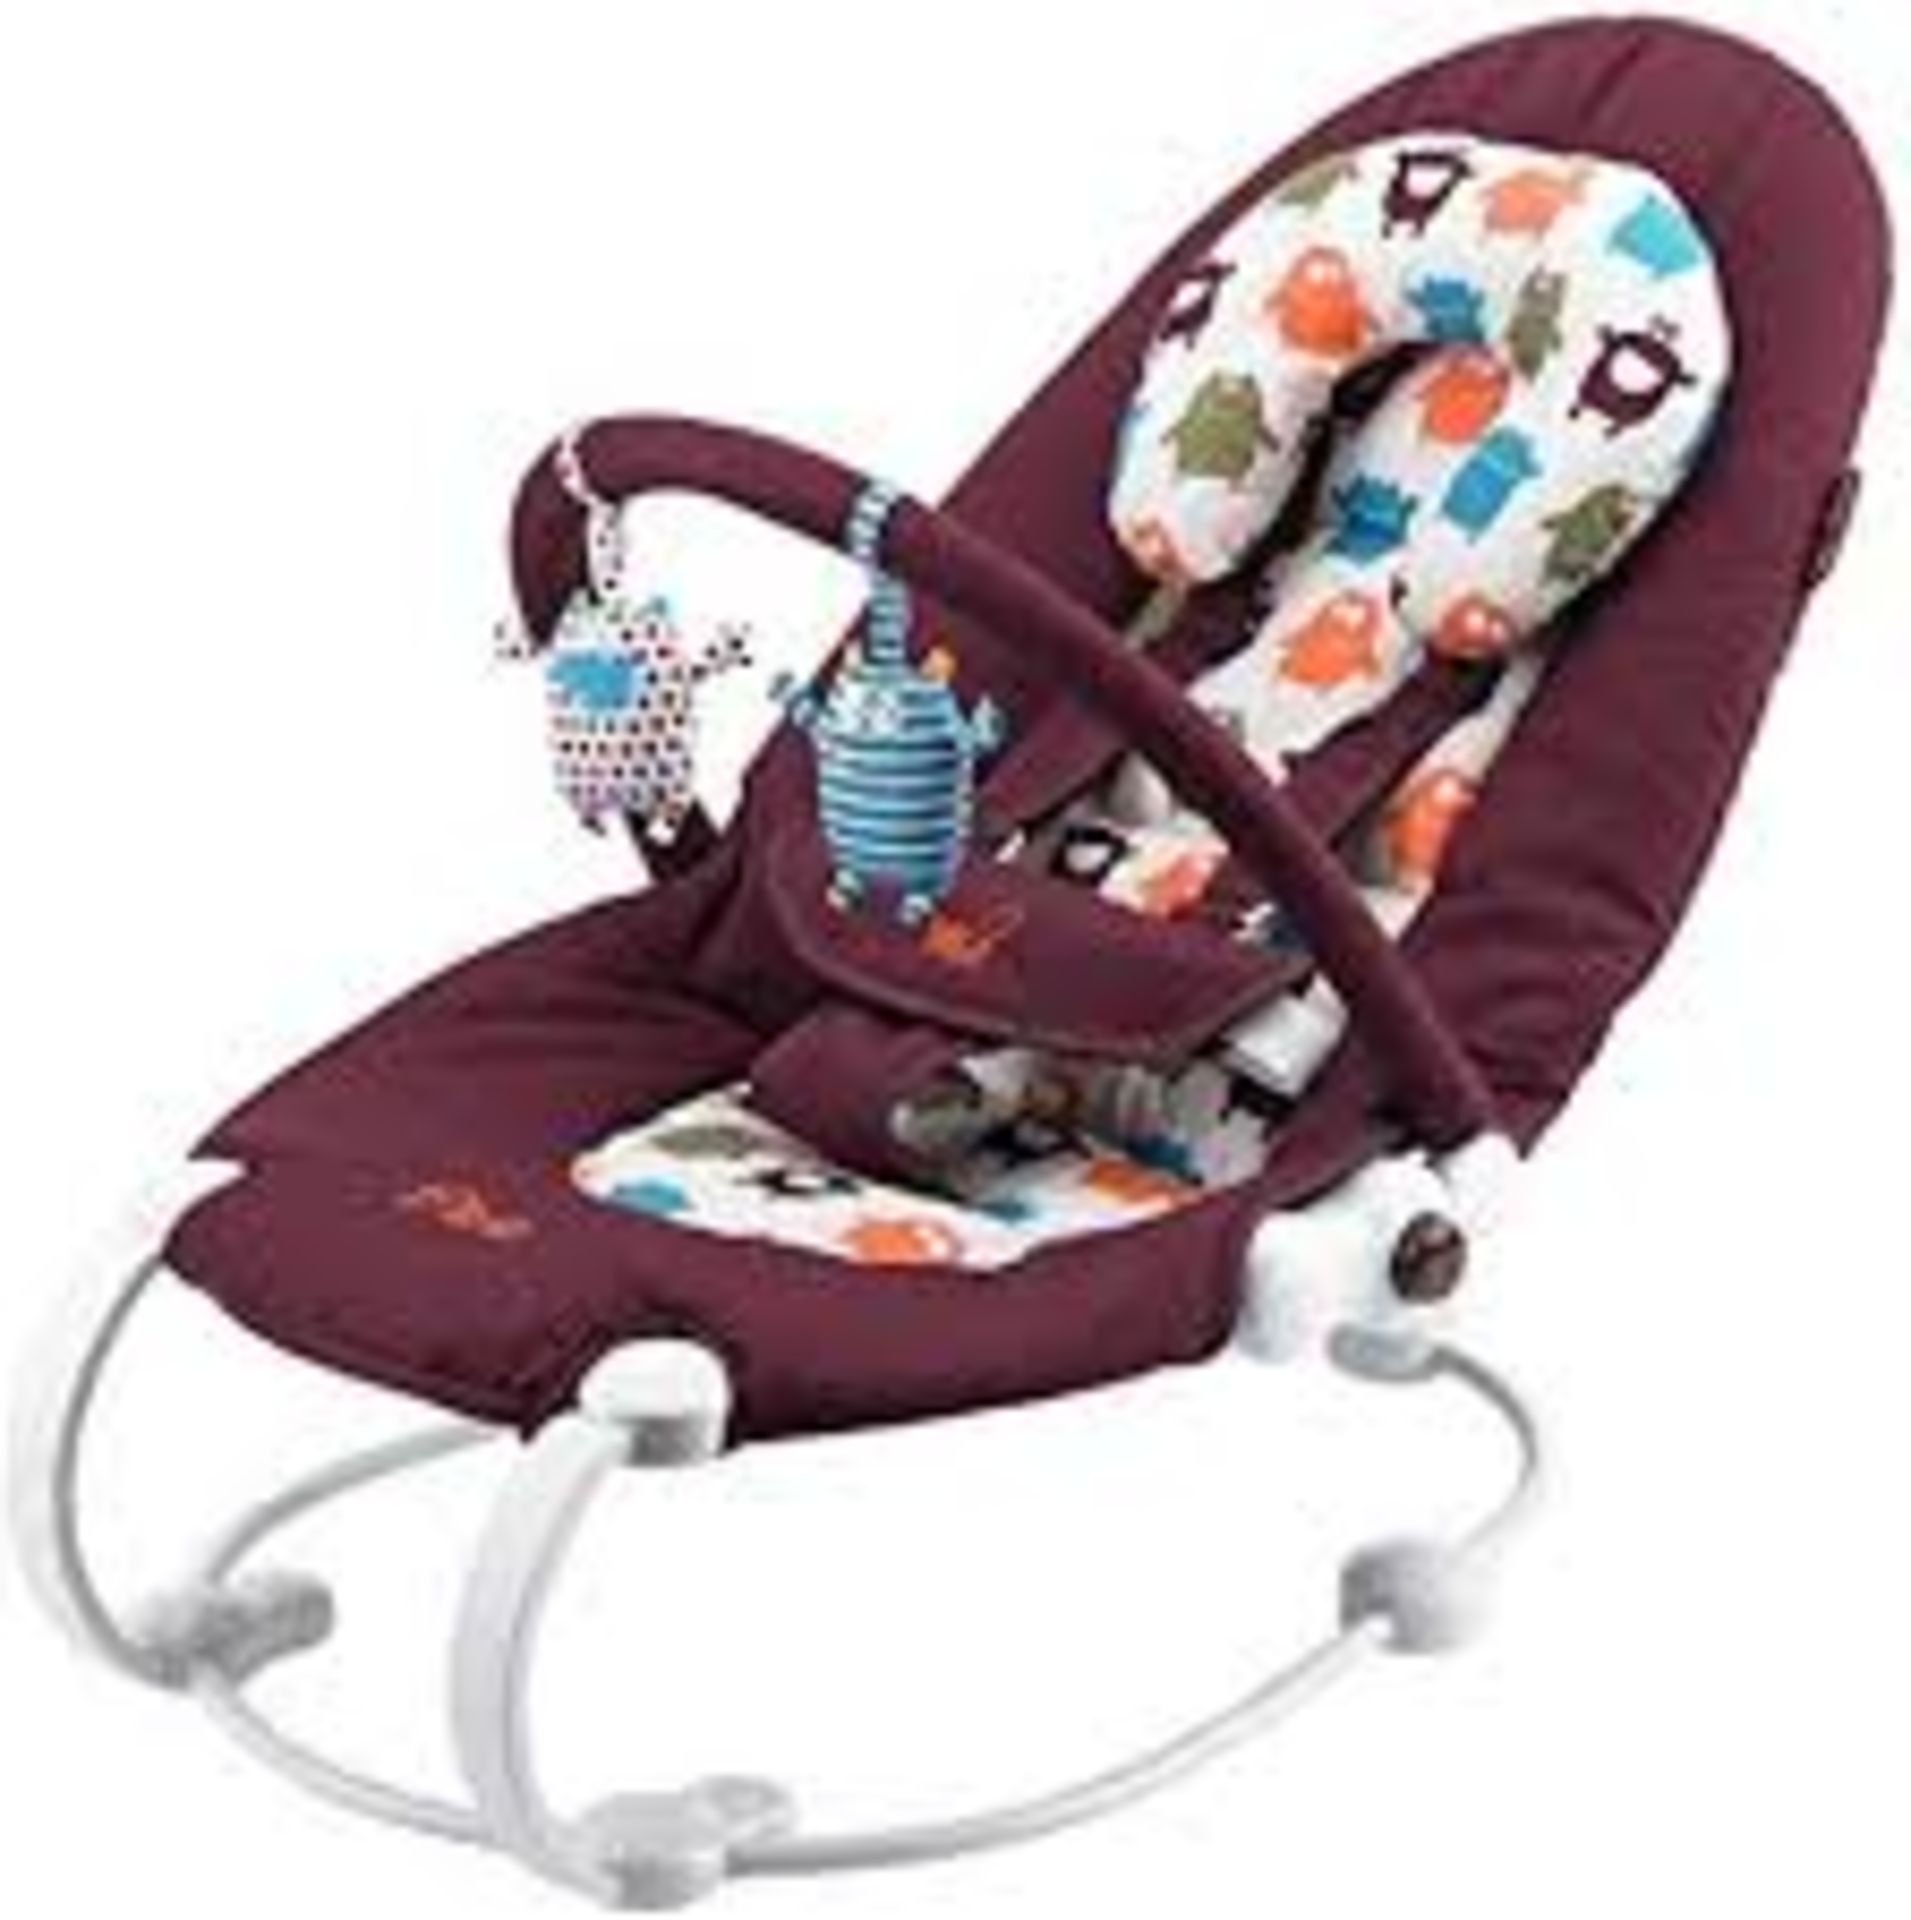 Boxed Bababing Lowbo 2 Baby Bouncer RRP £50 (BUN487512) (PICTURES ARE FOR ILLUSTRATION PURPOSES